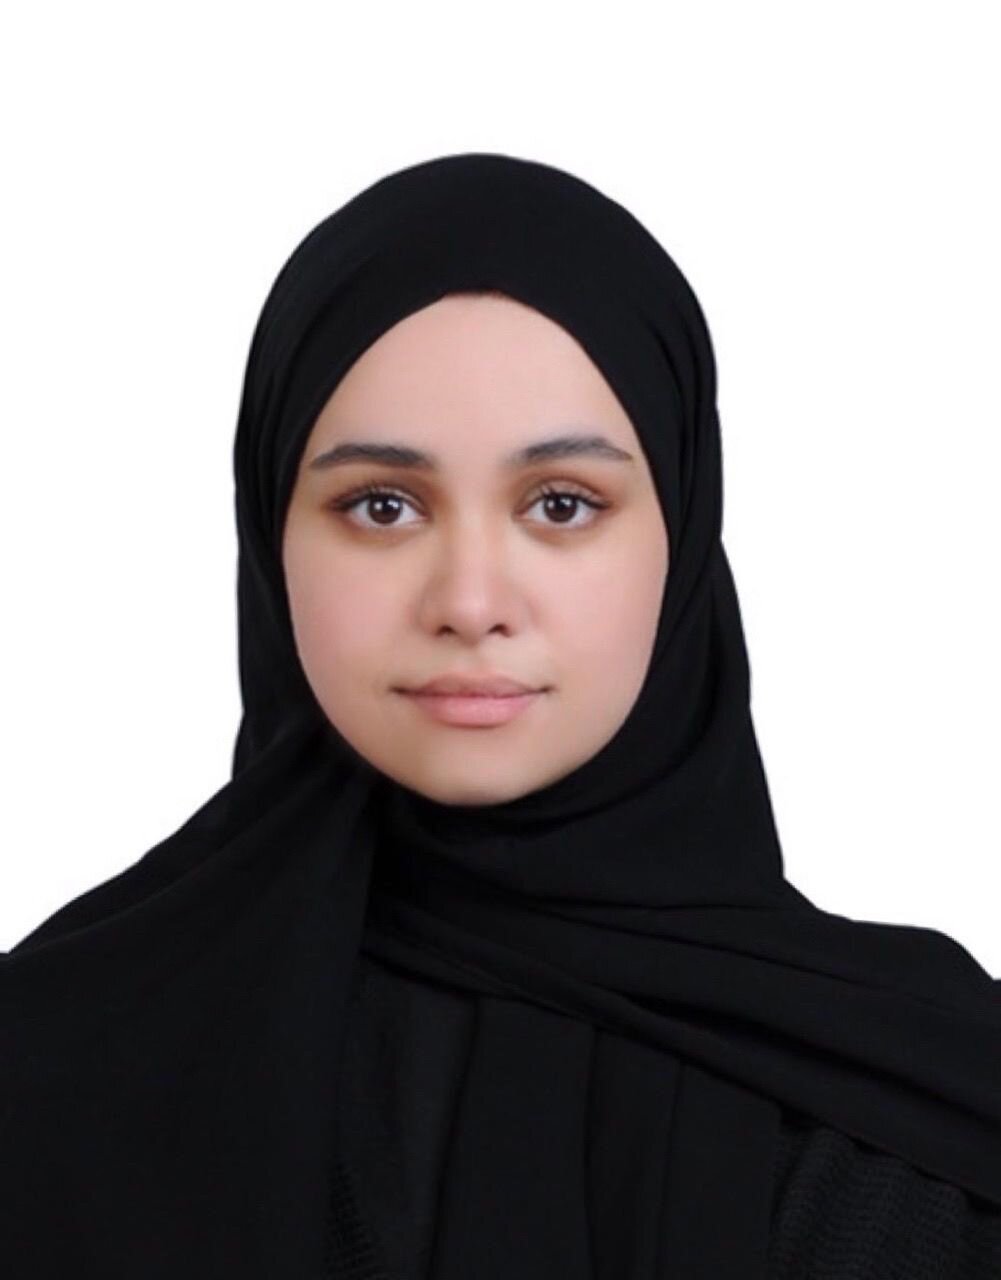 Maitha is currently a Master's student in Computer Vision at Mohammed Bin Zayed University of Artificial Intelligence.